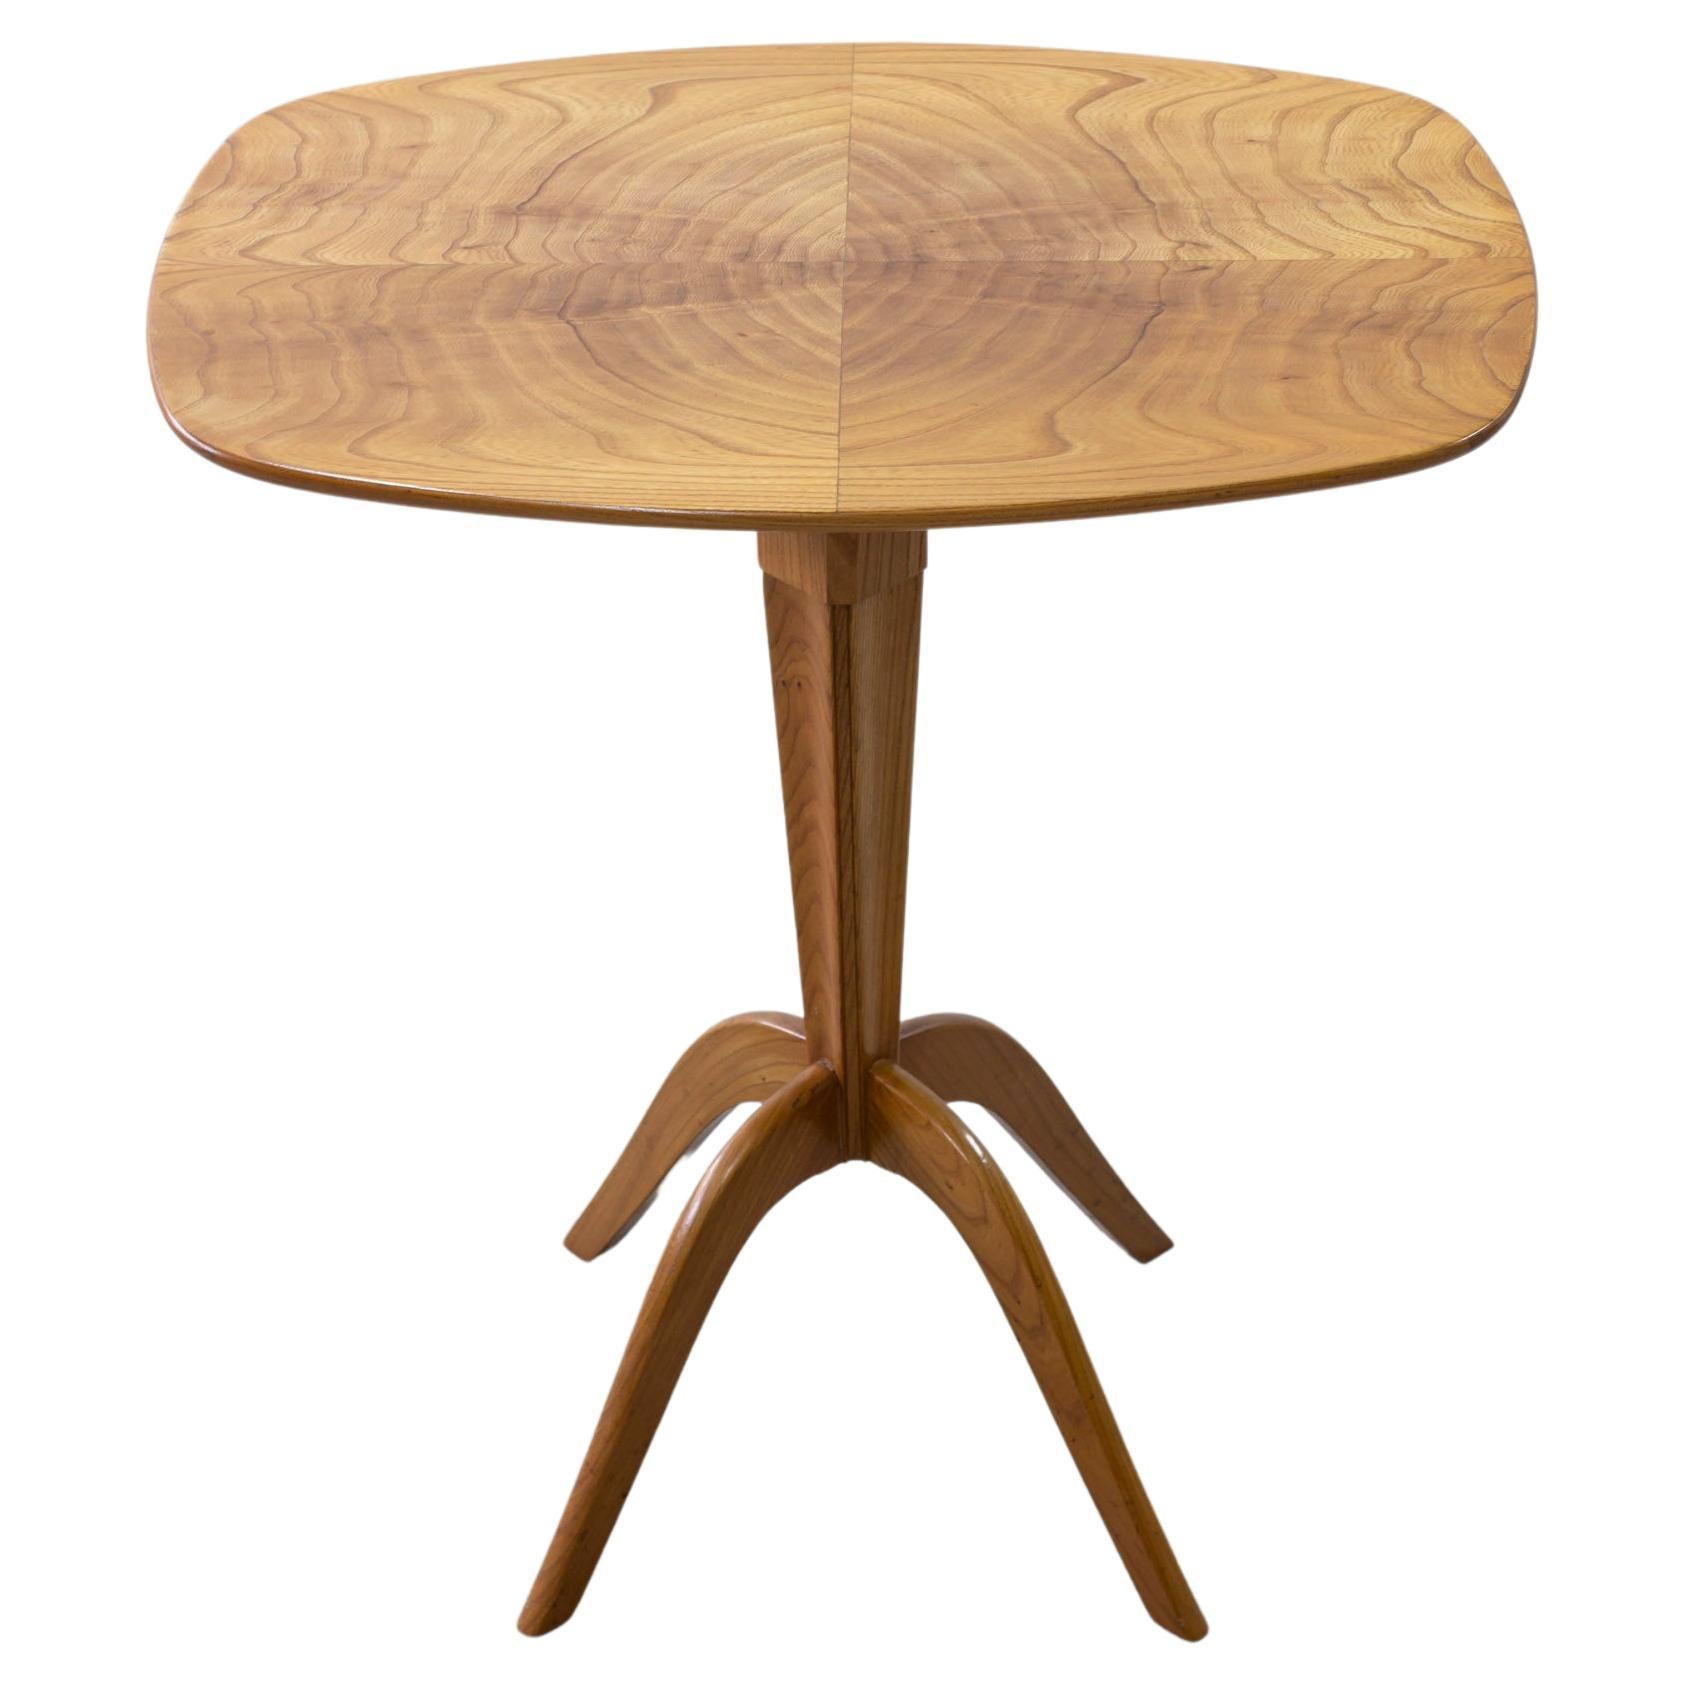 Swedish modern elm side table in the manner of Oscar Nilsson, 1930-40s For Sale